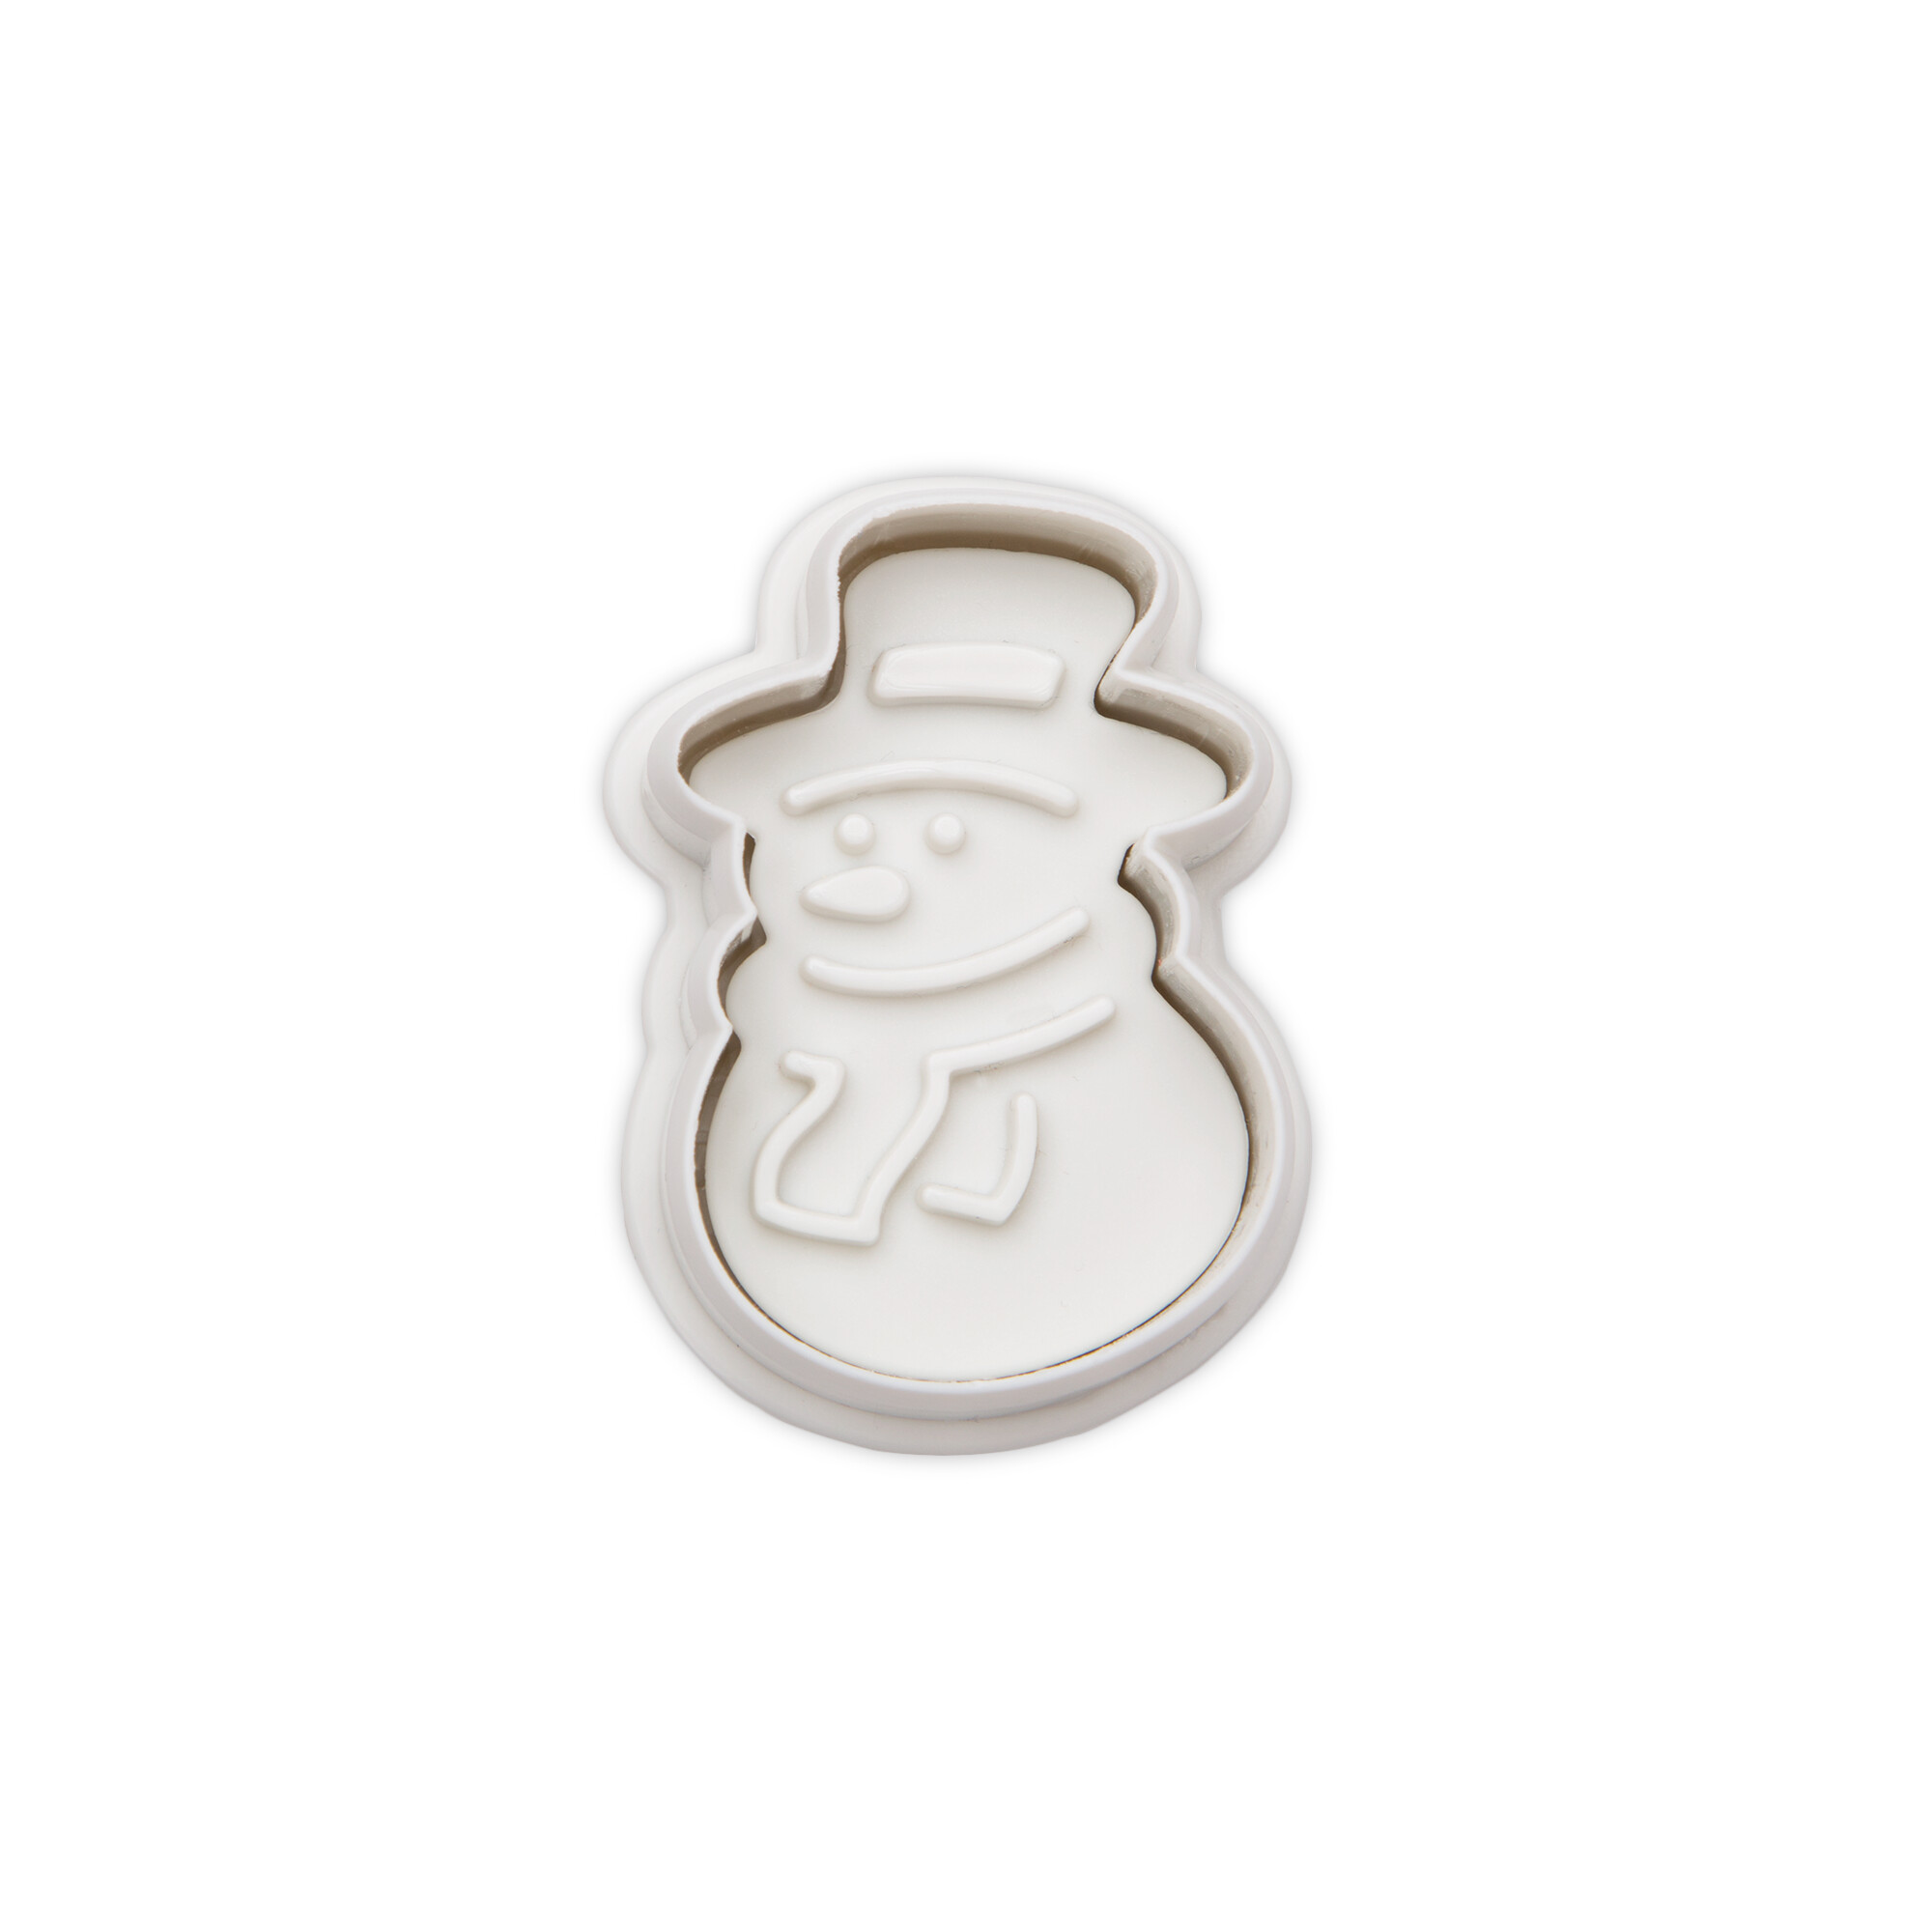 Cookie cutter with stamp and ejector – Snowman